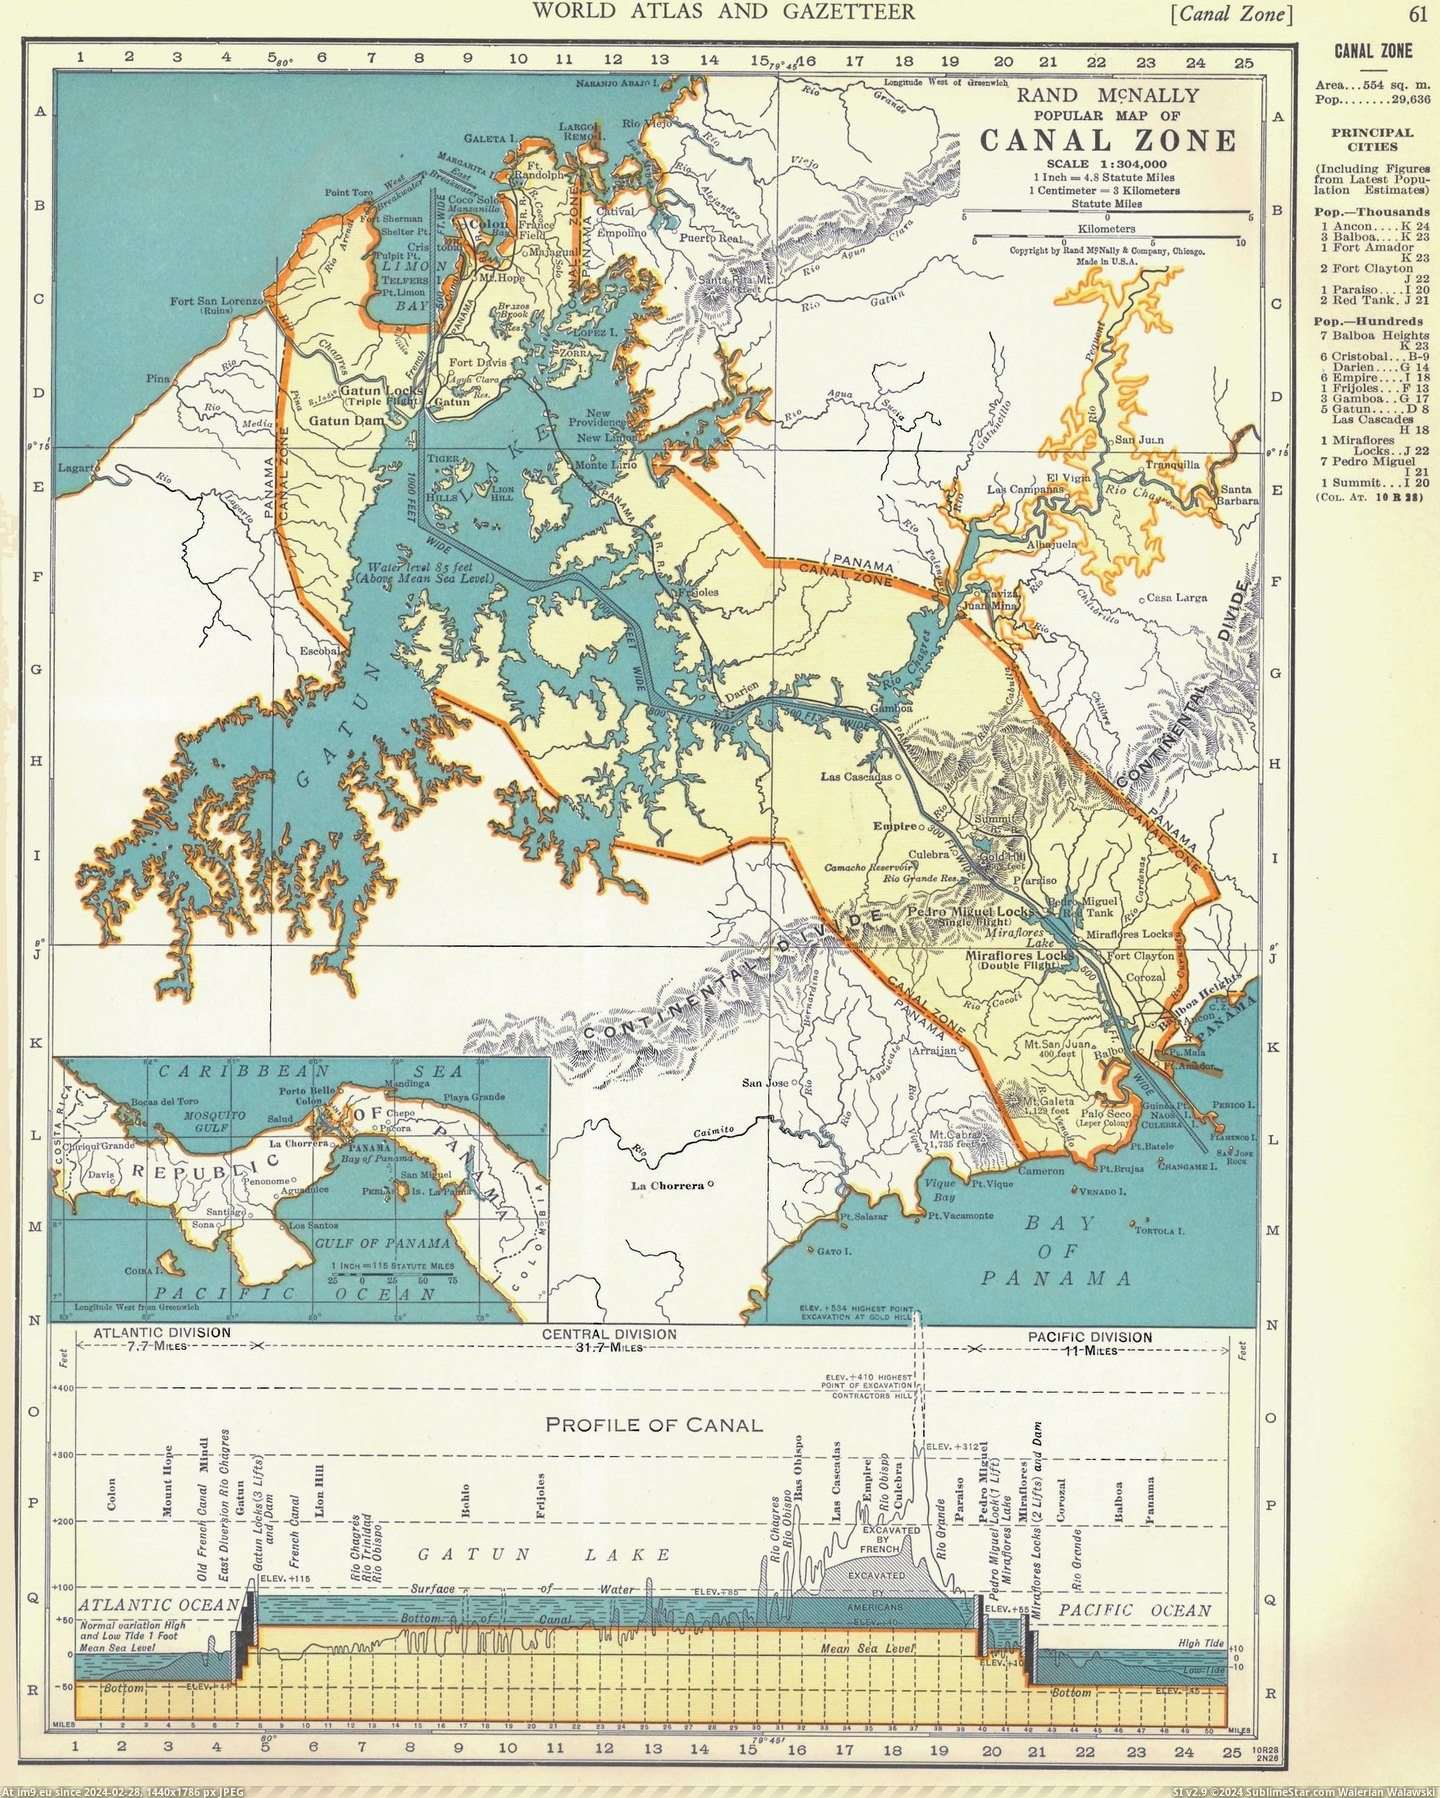 #Panama #Zone #Canal [Mapporn] Panama Canal Zone 1939 [2073x2583] Pic. (Image of album My r/MAPS favs))